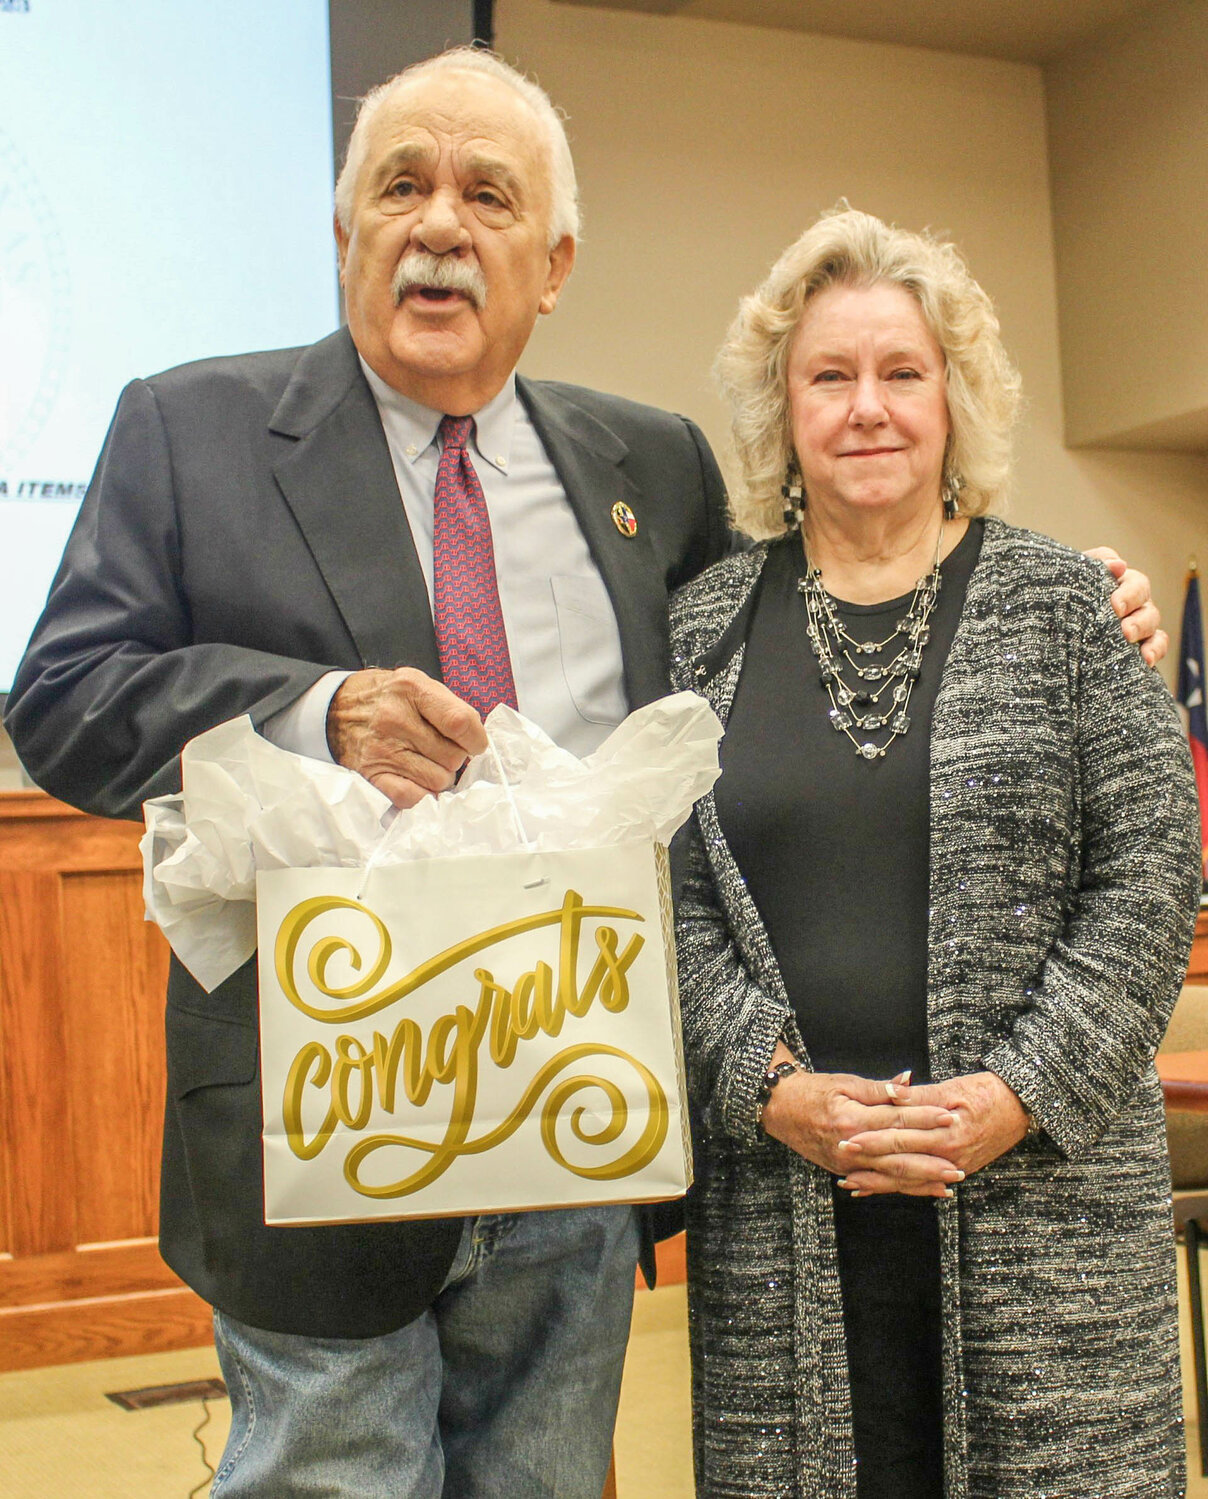 Former Hood County Auditor Rebecca (Becky) Kidd, right, poses with Hood County Judge Ron Massingill following the announcement of her retirement last December.